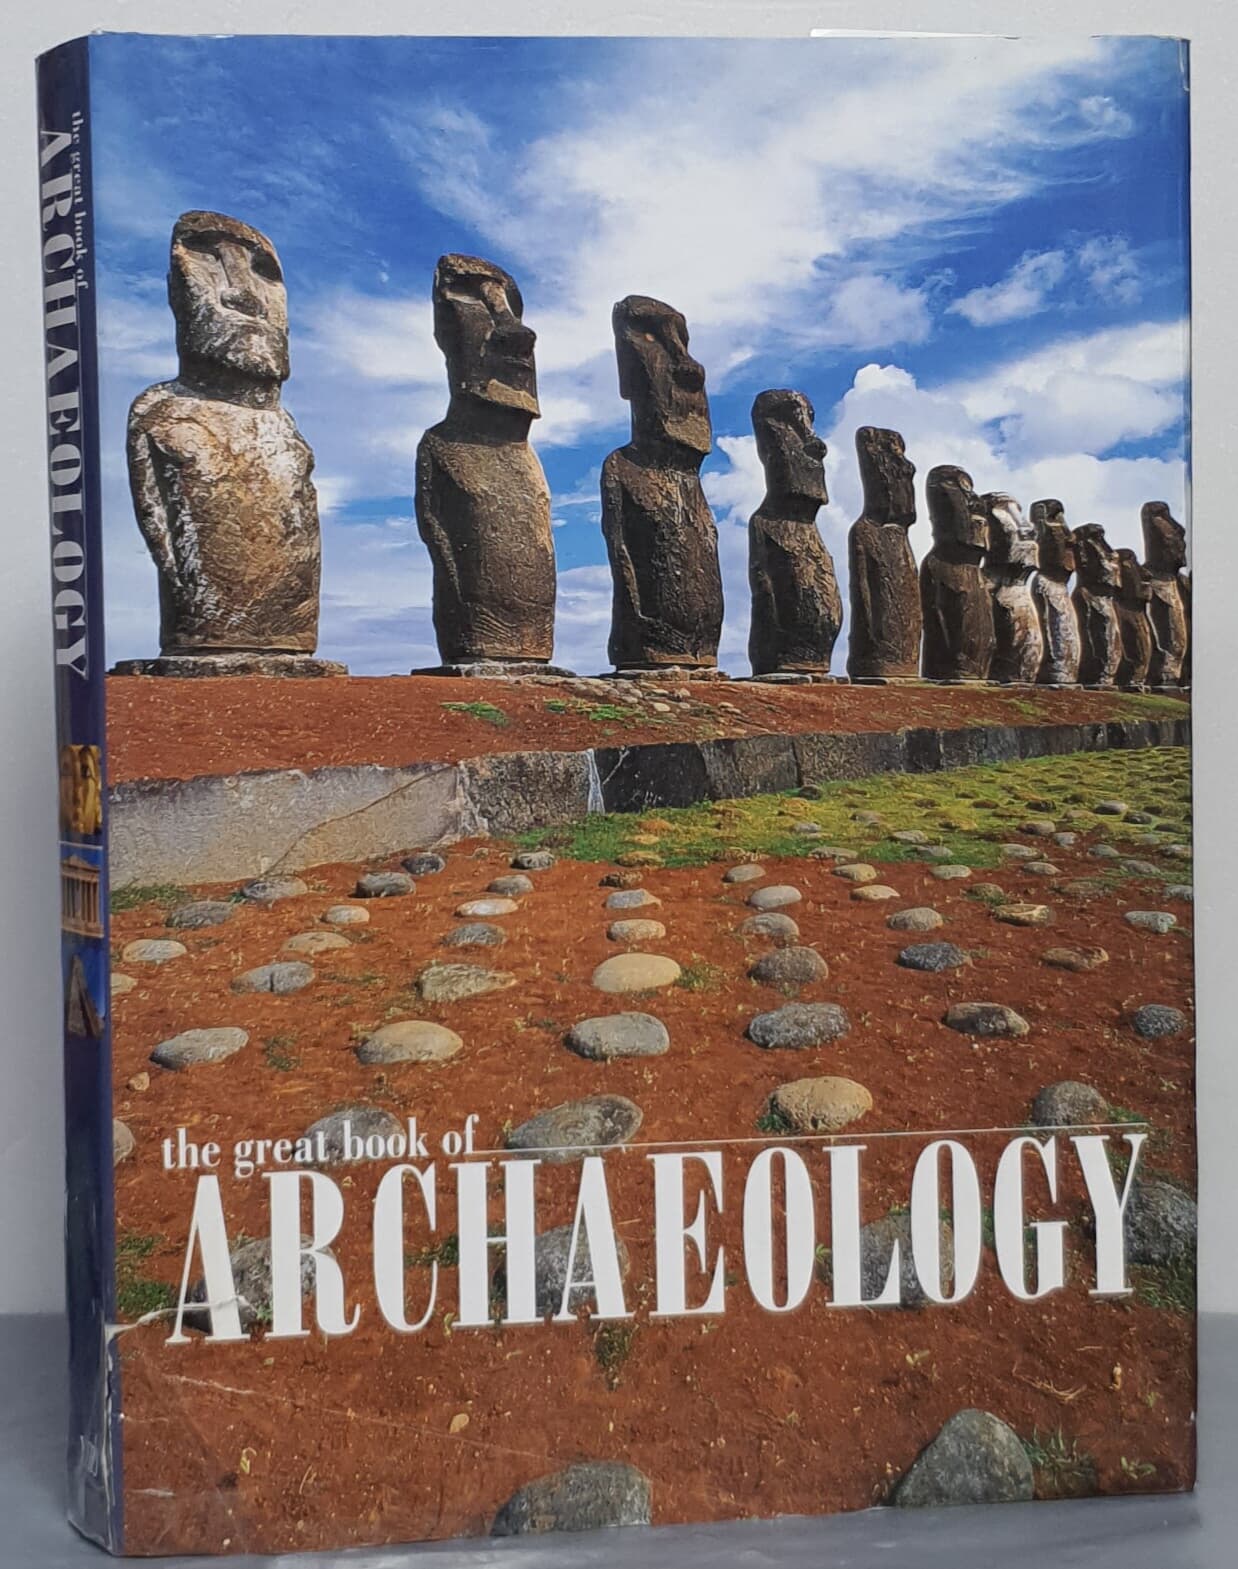 The Great Book of Archaeology (Hardcover) 